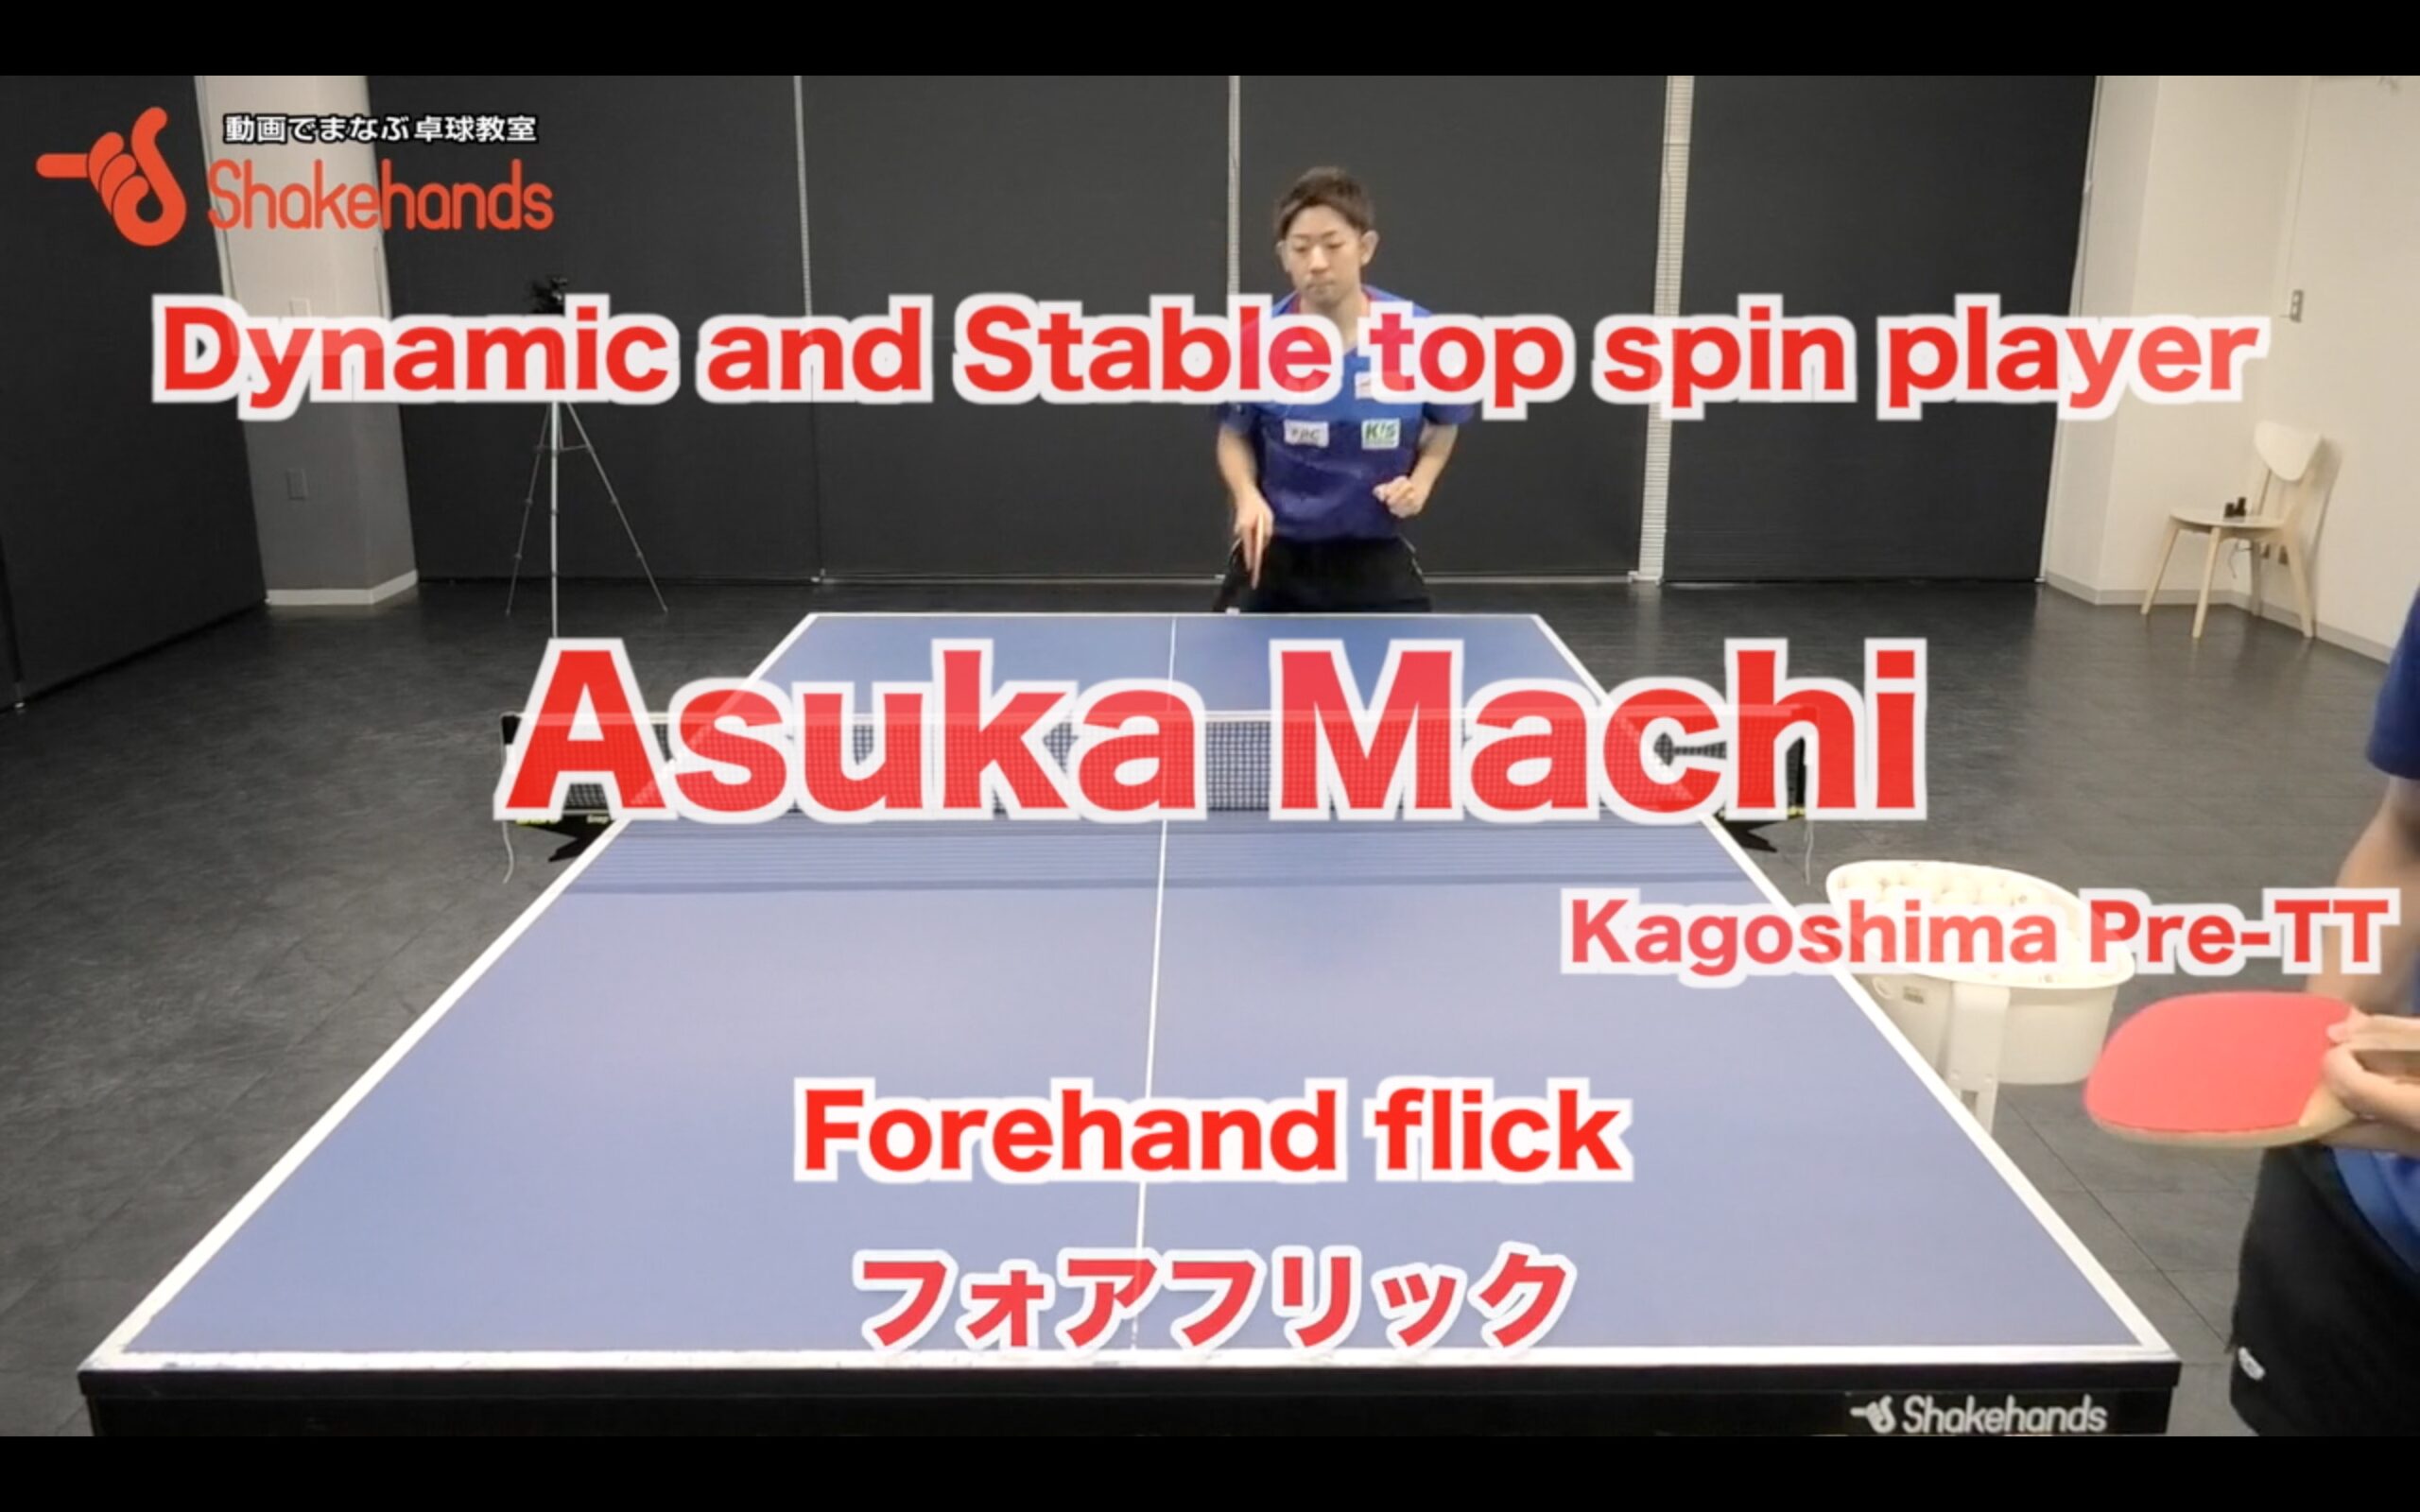 Forehand flick